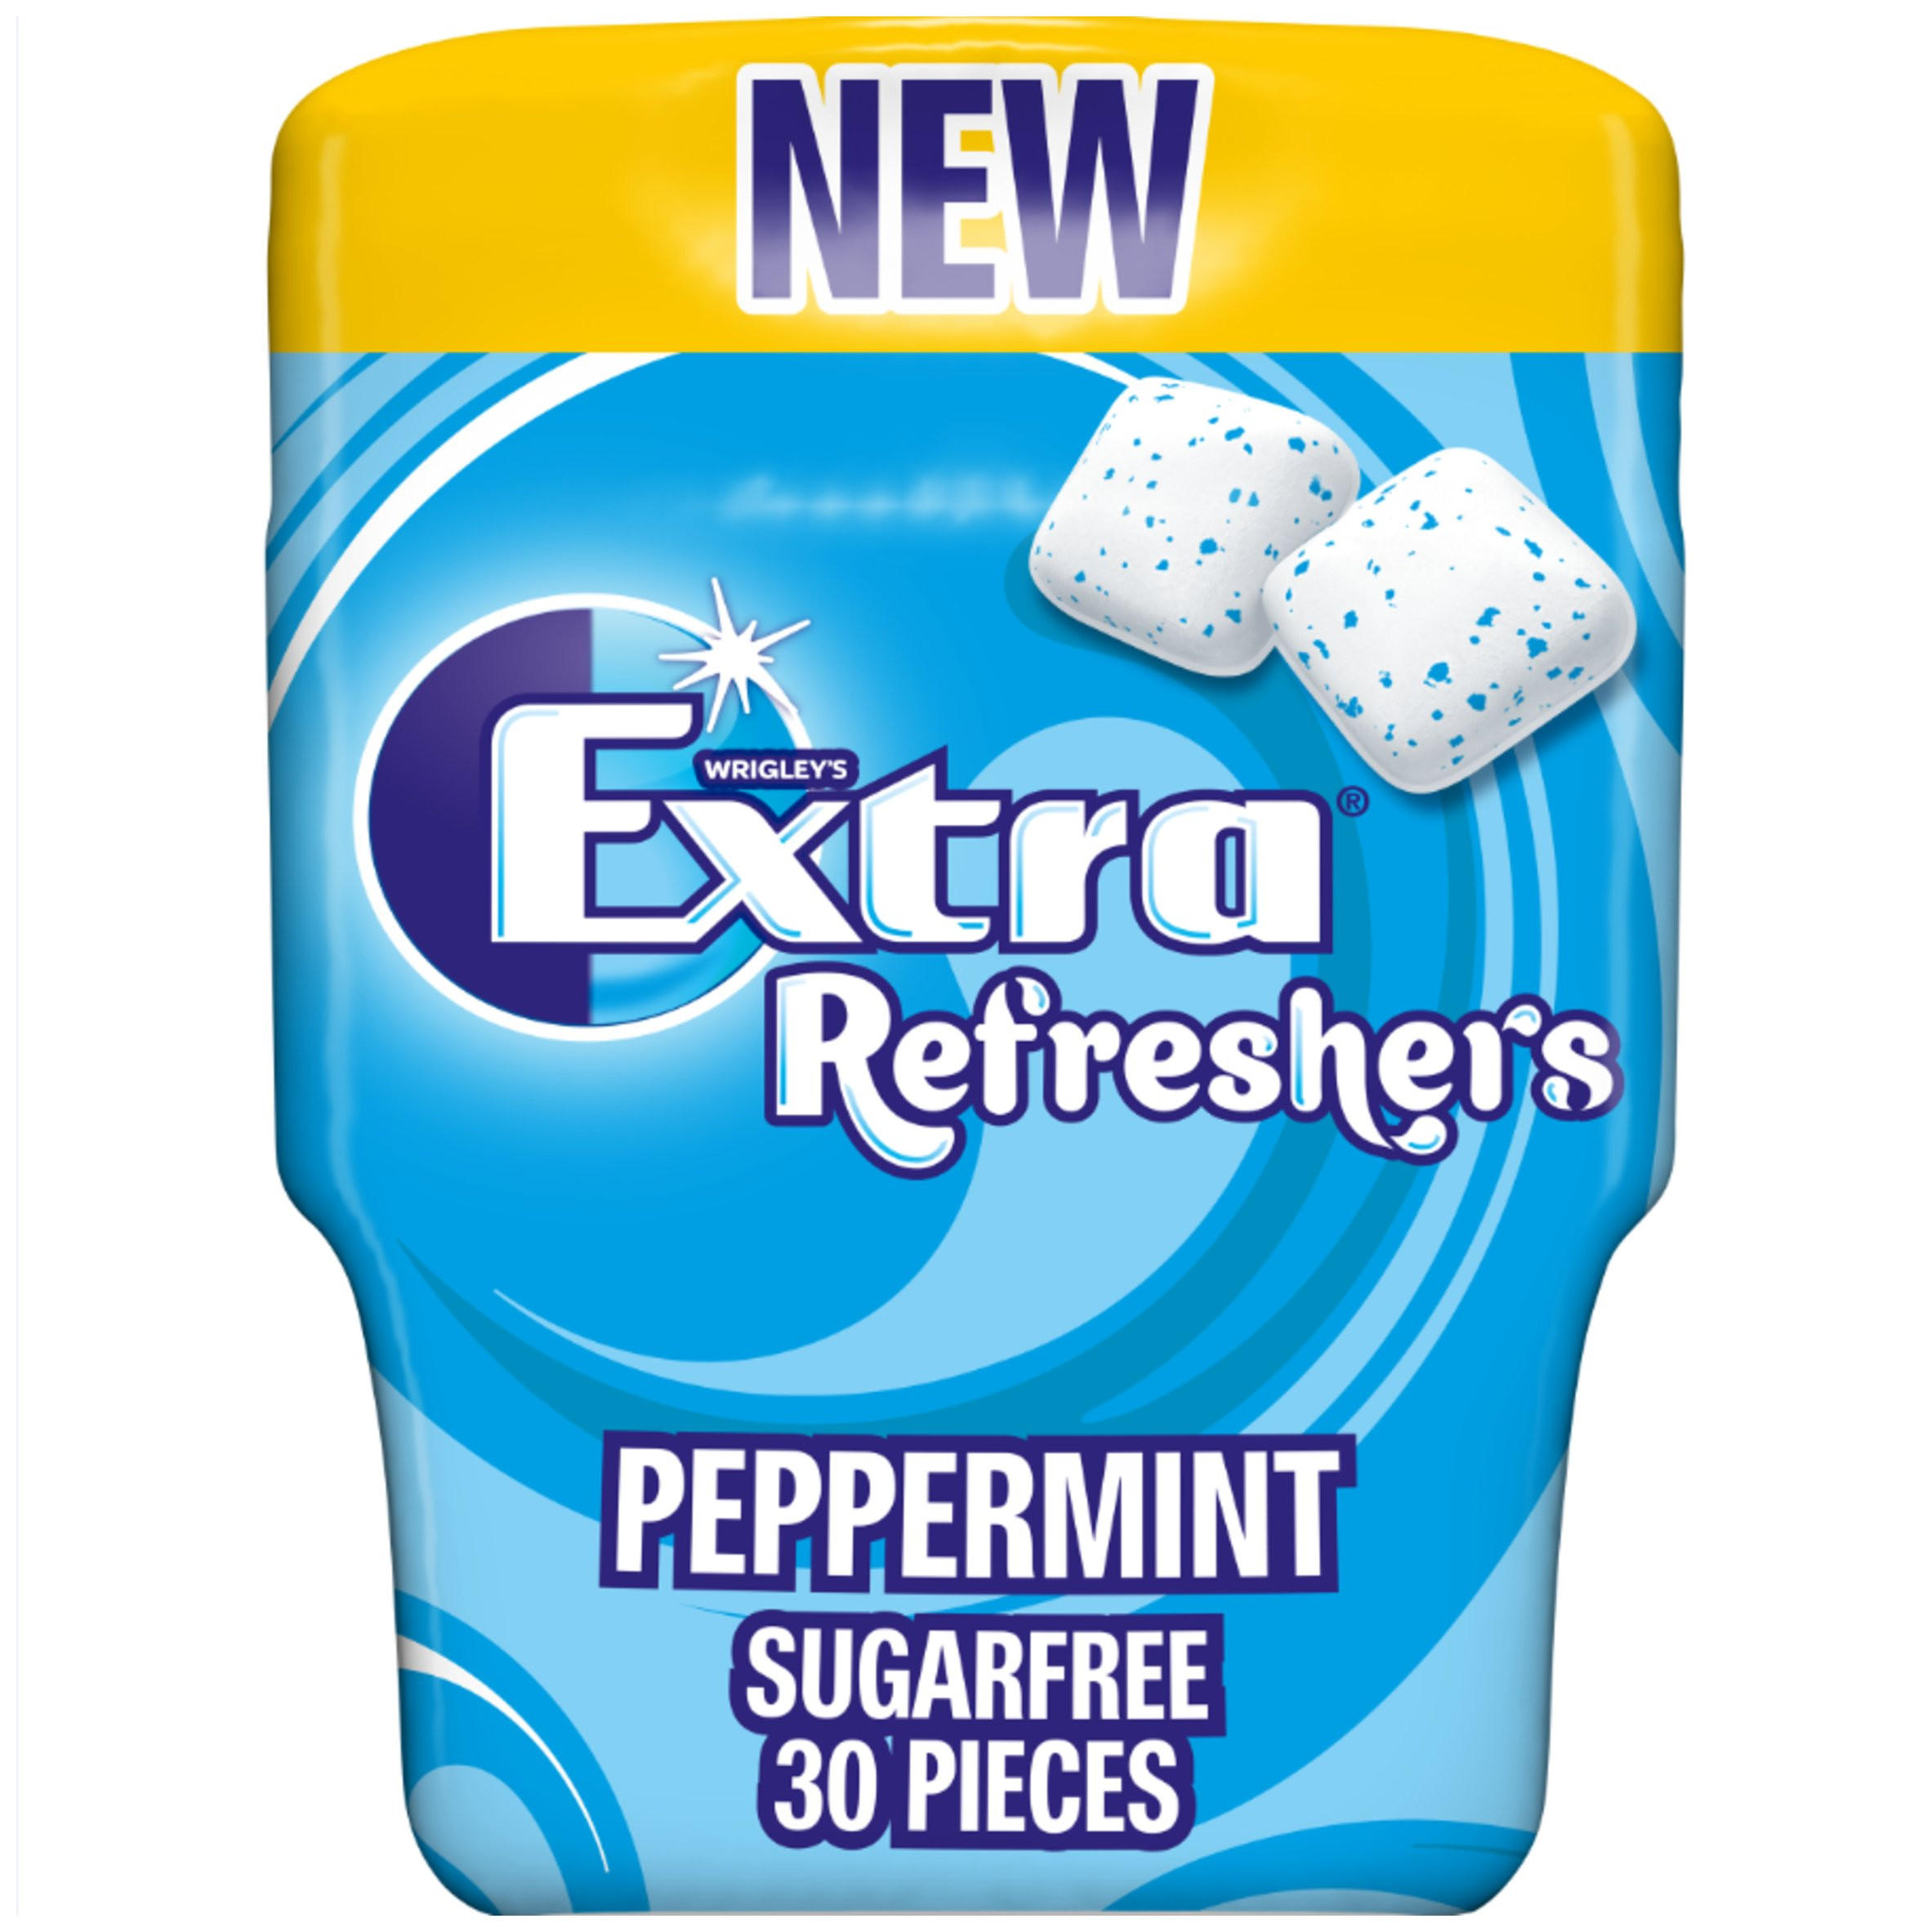 Wrigleys Extra Refreshers Peppermint Sugar Free Chewing Gum Bottle 30pcs Chewing Gum And Mints